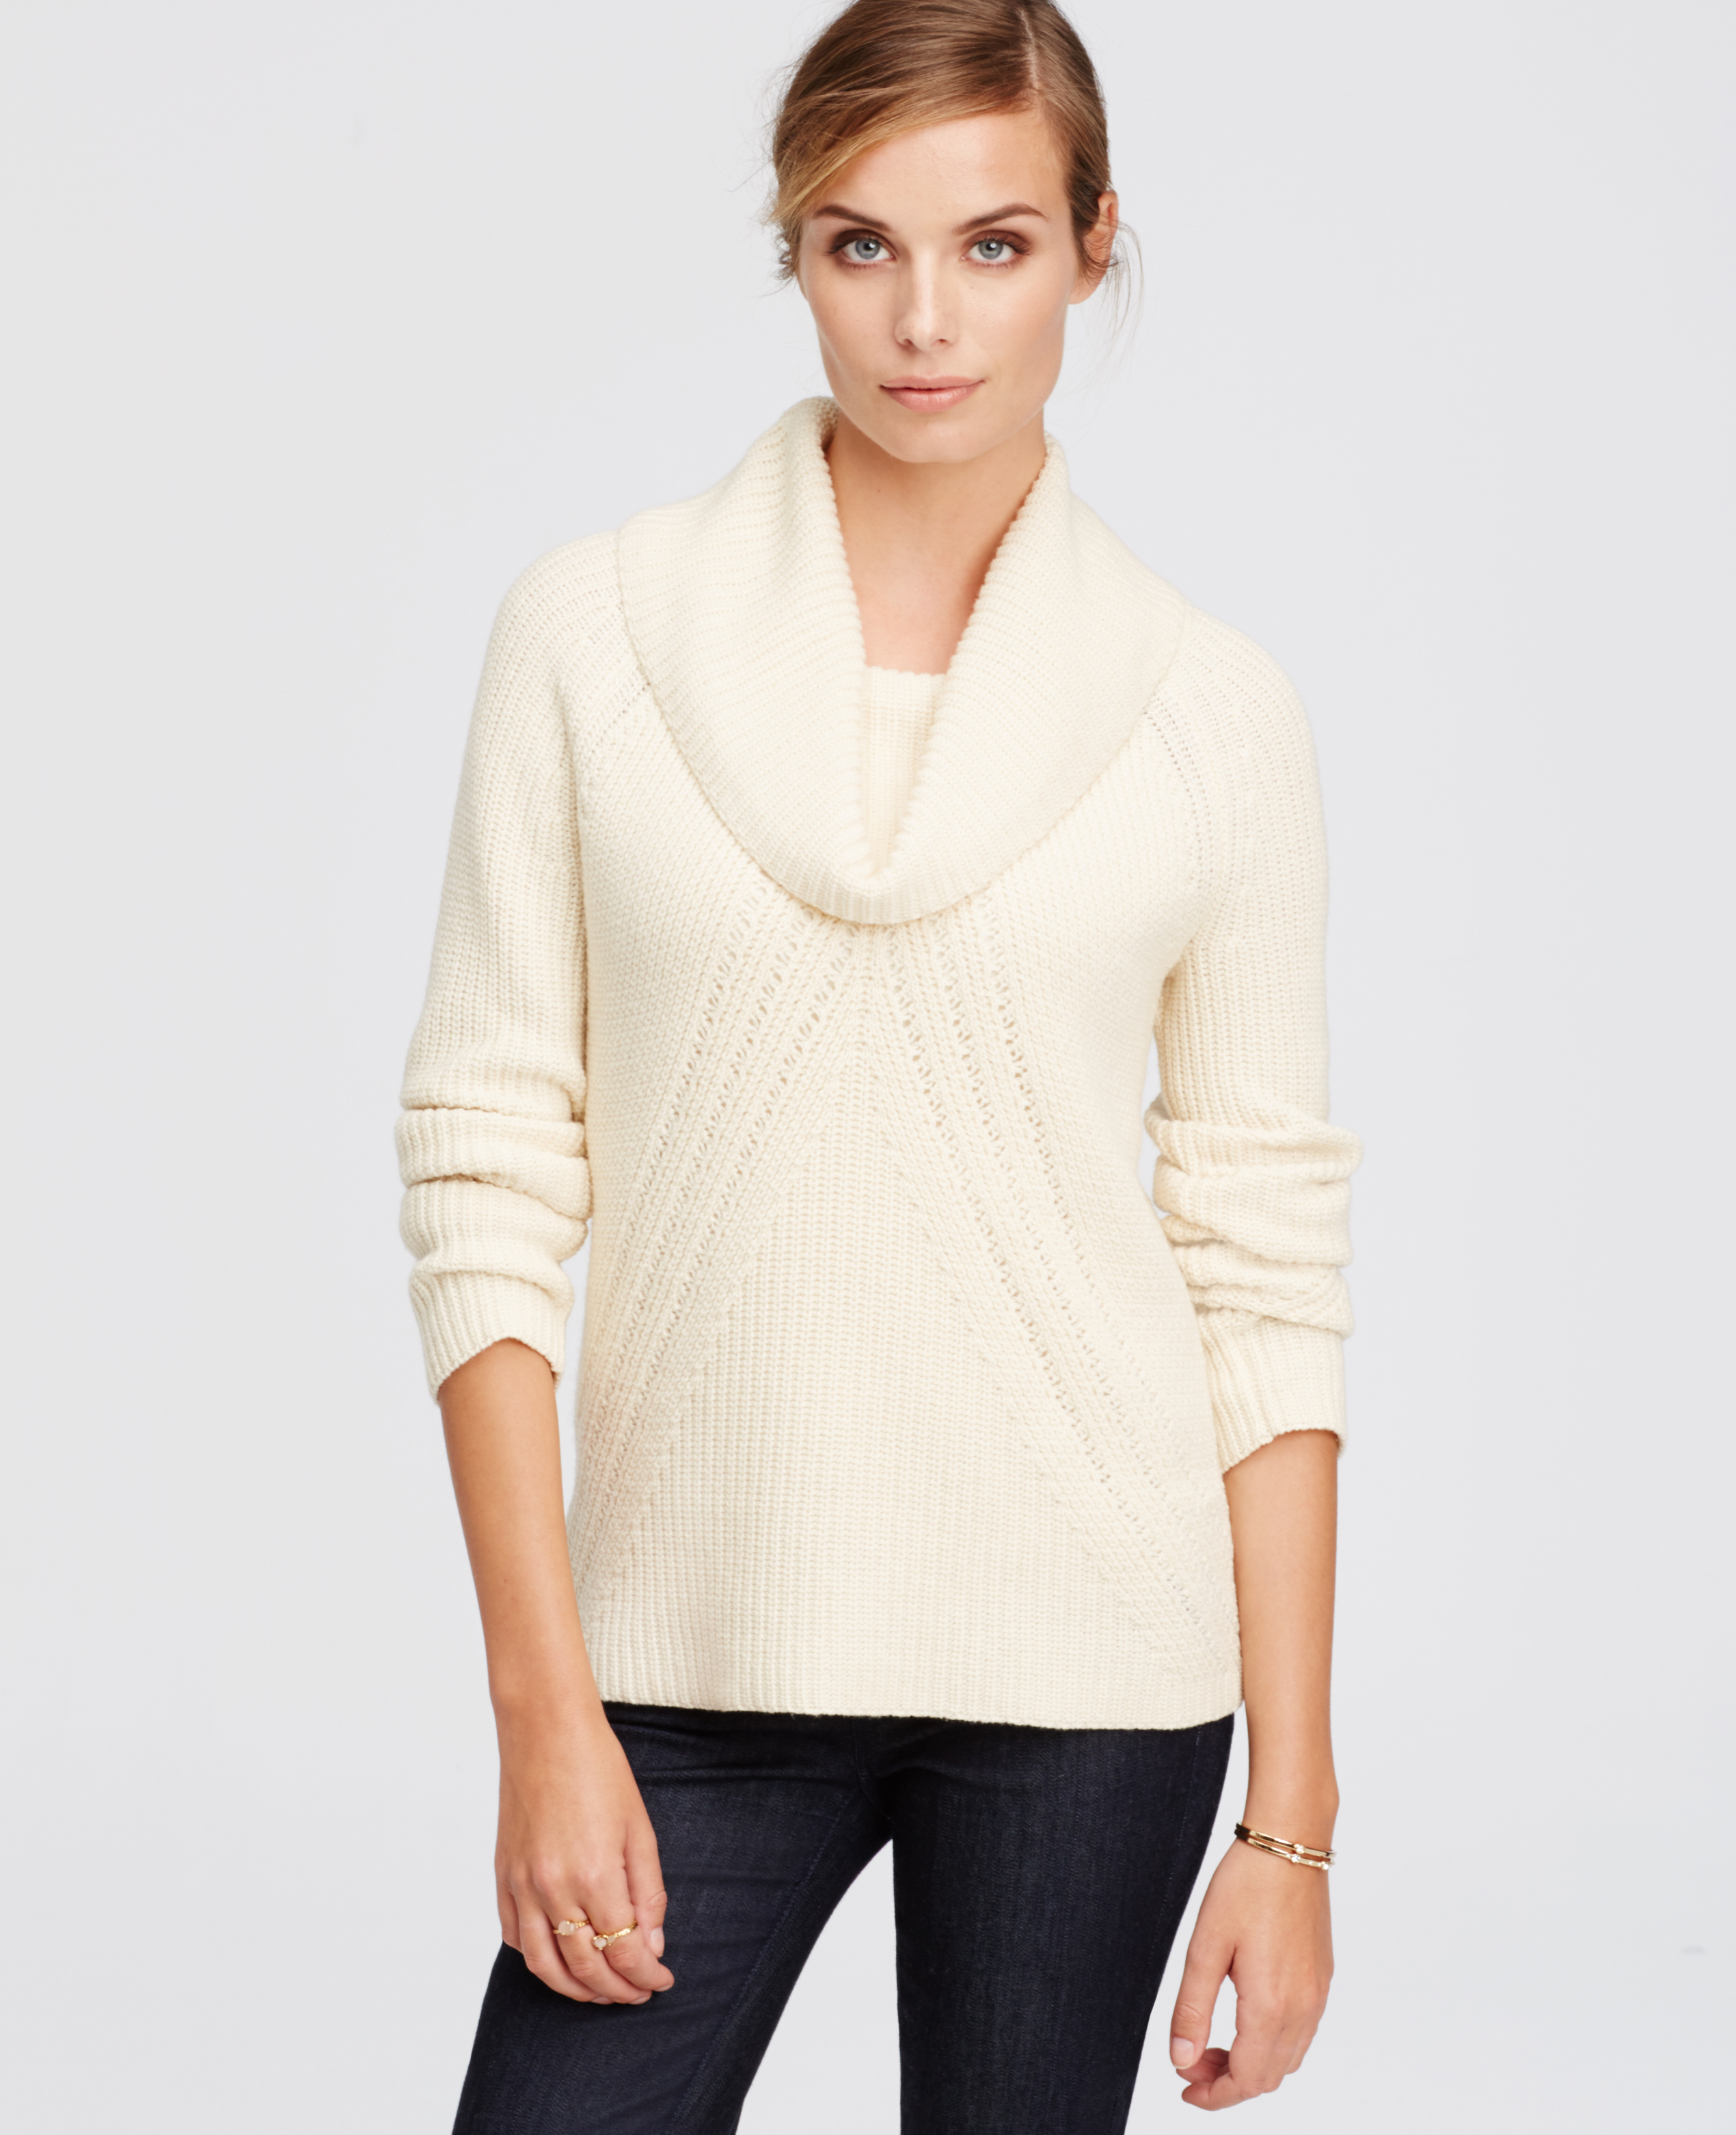 Ann taylor Petite Cowl Neck Sweater in White | Lyst